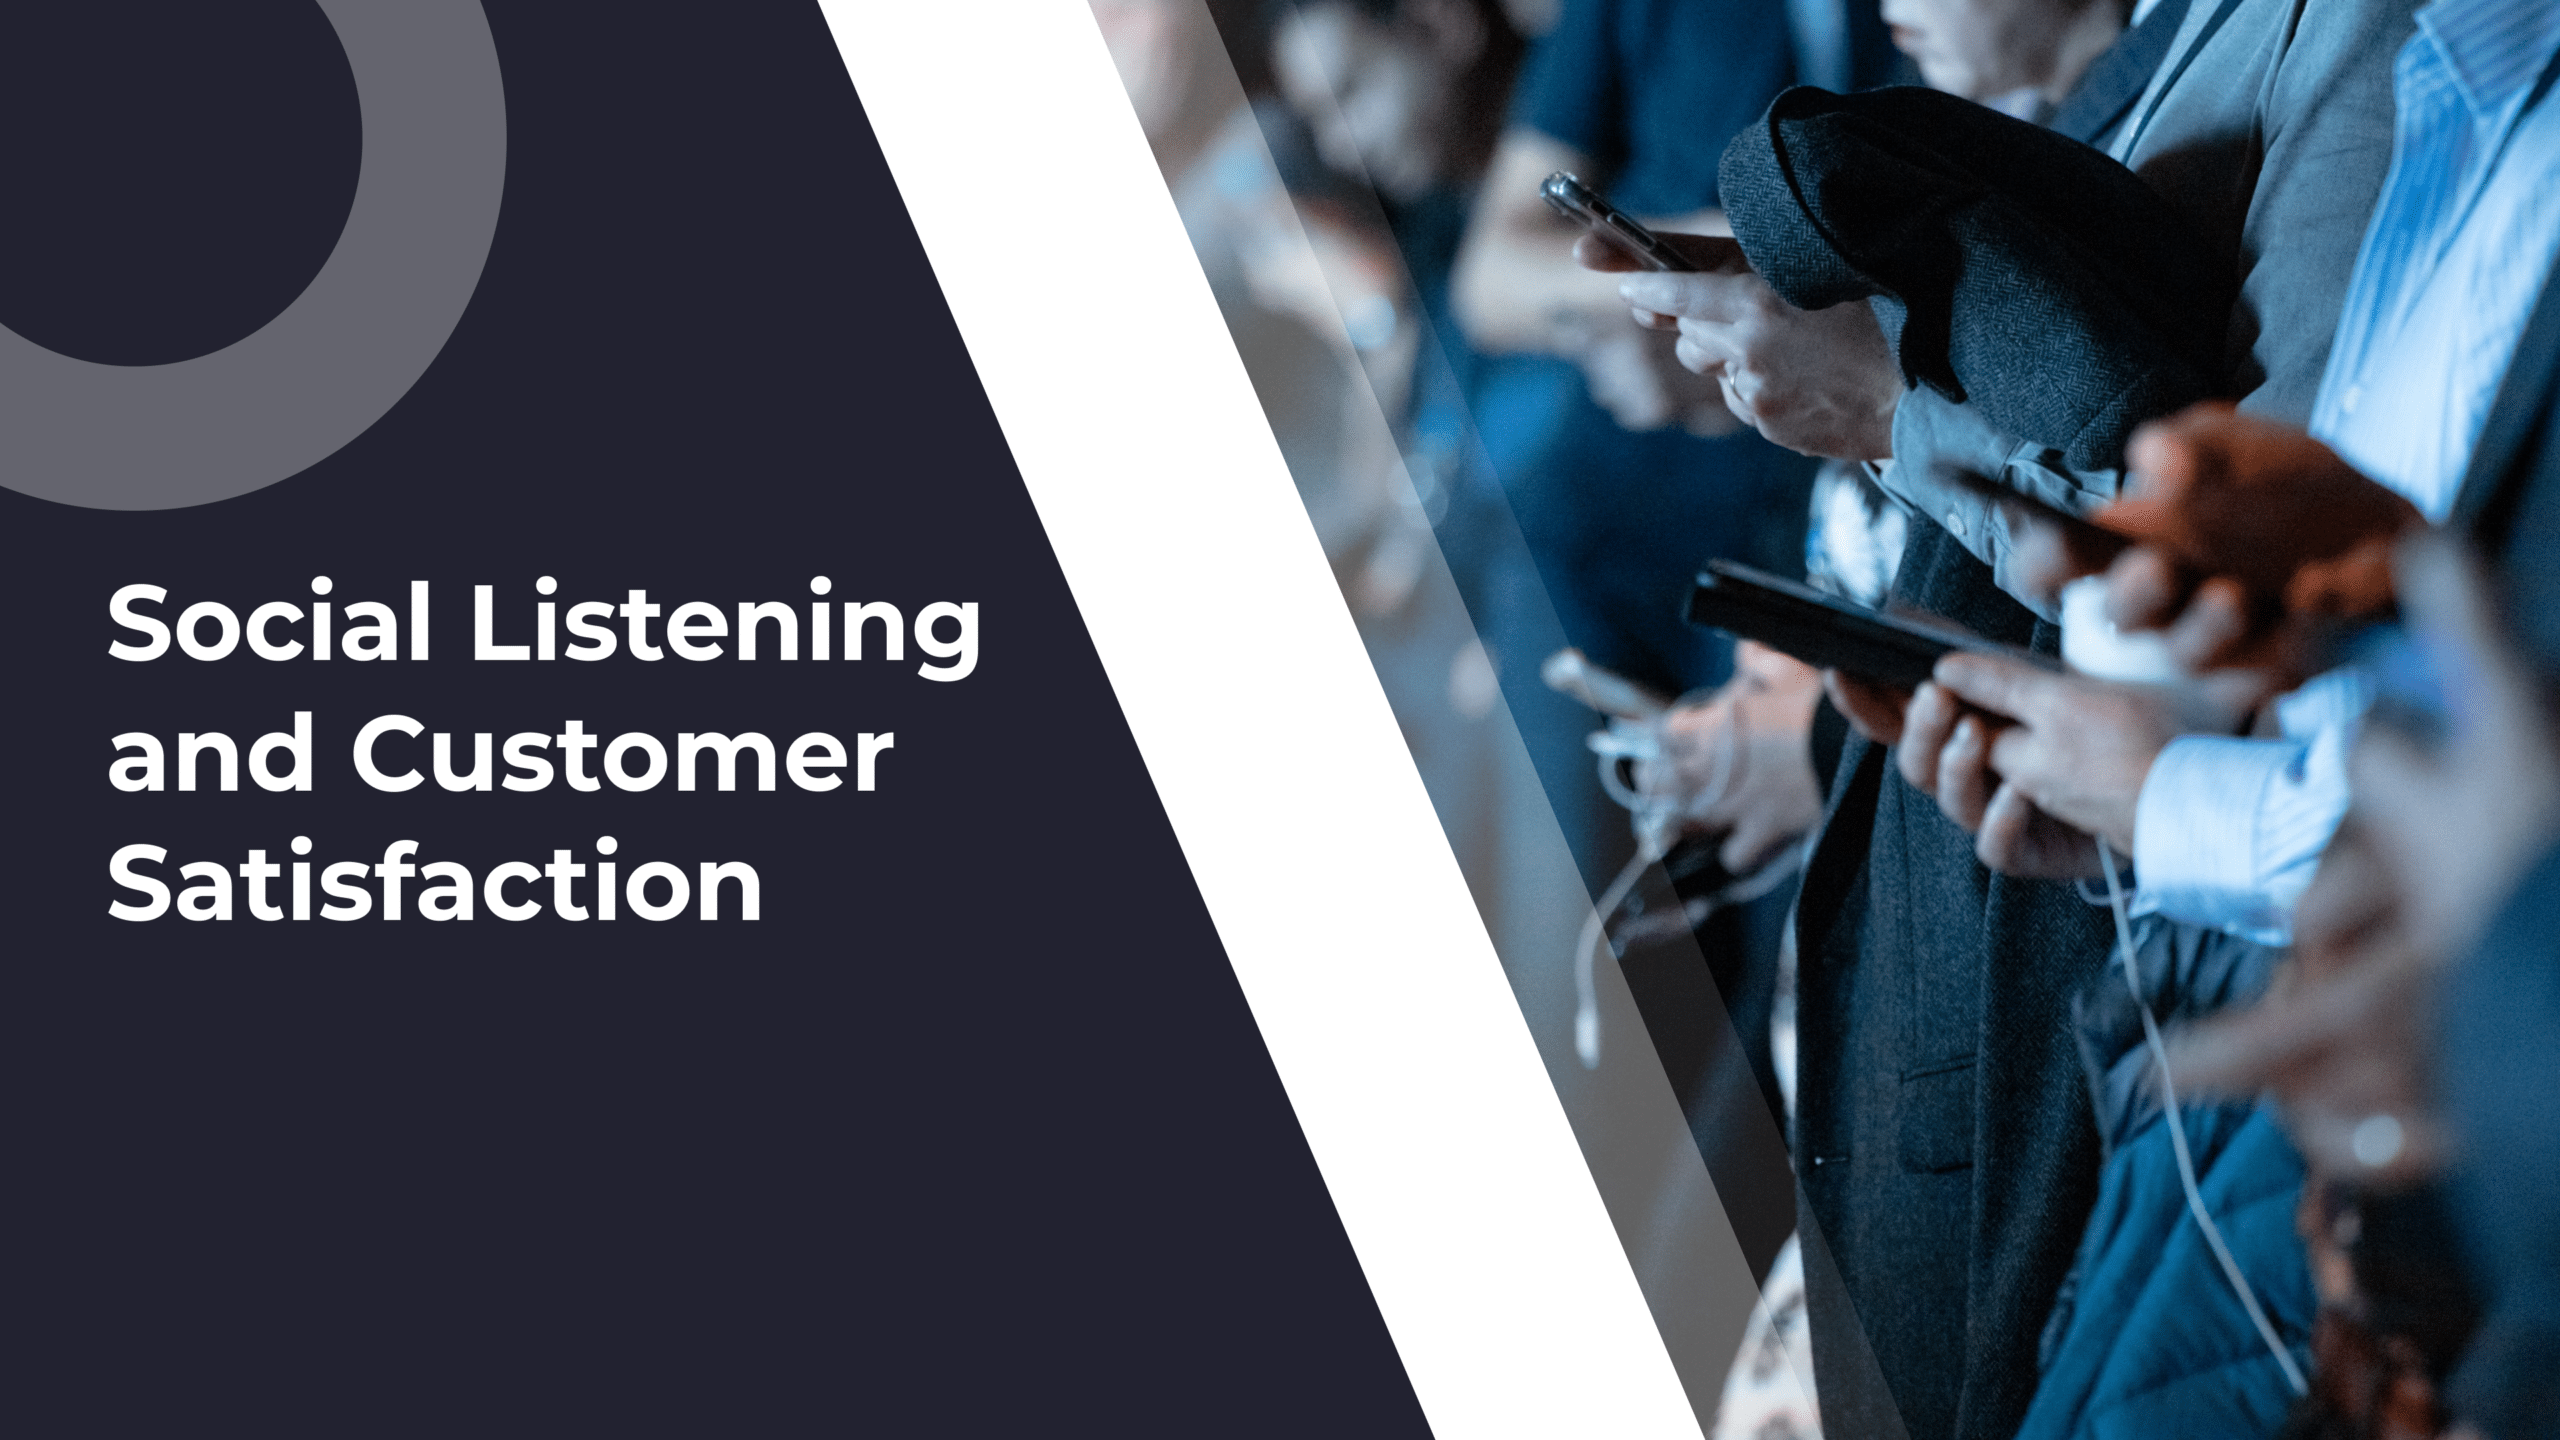 Why Social Listening Matters for Customer Satisfaction